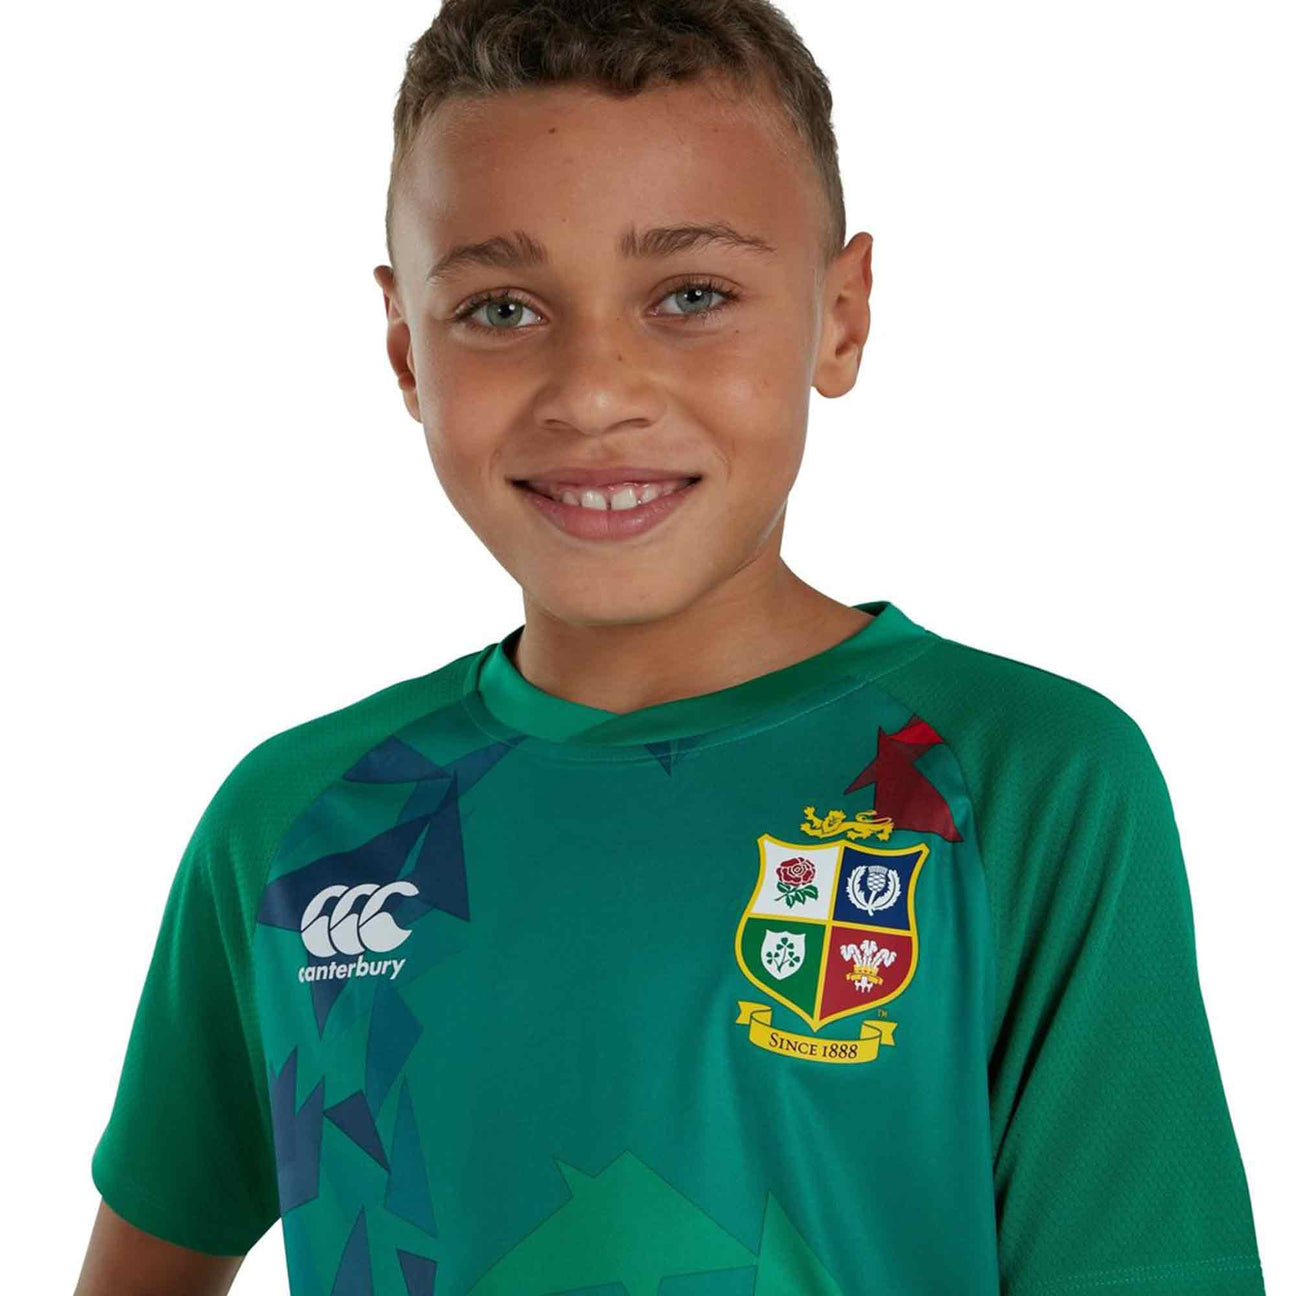 Kids' Rugby T-Shirts | Absolute Rugby